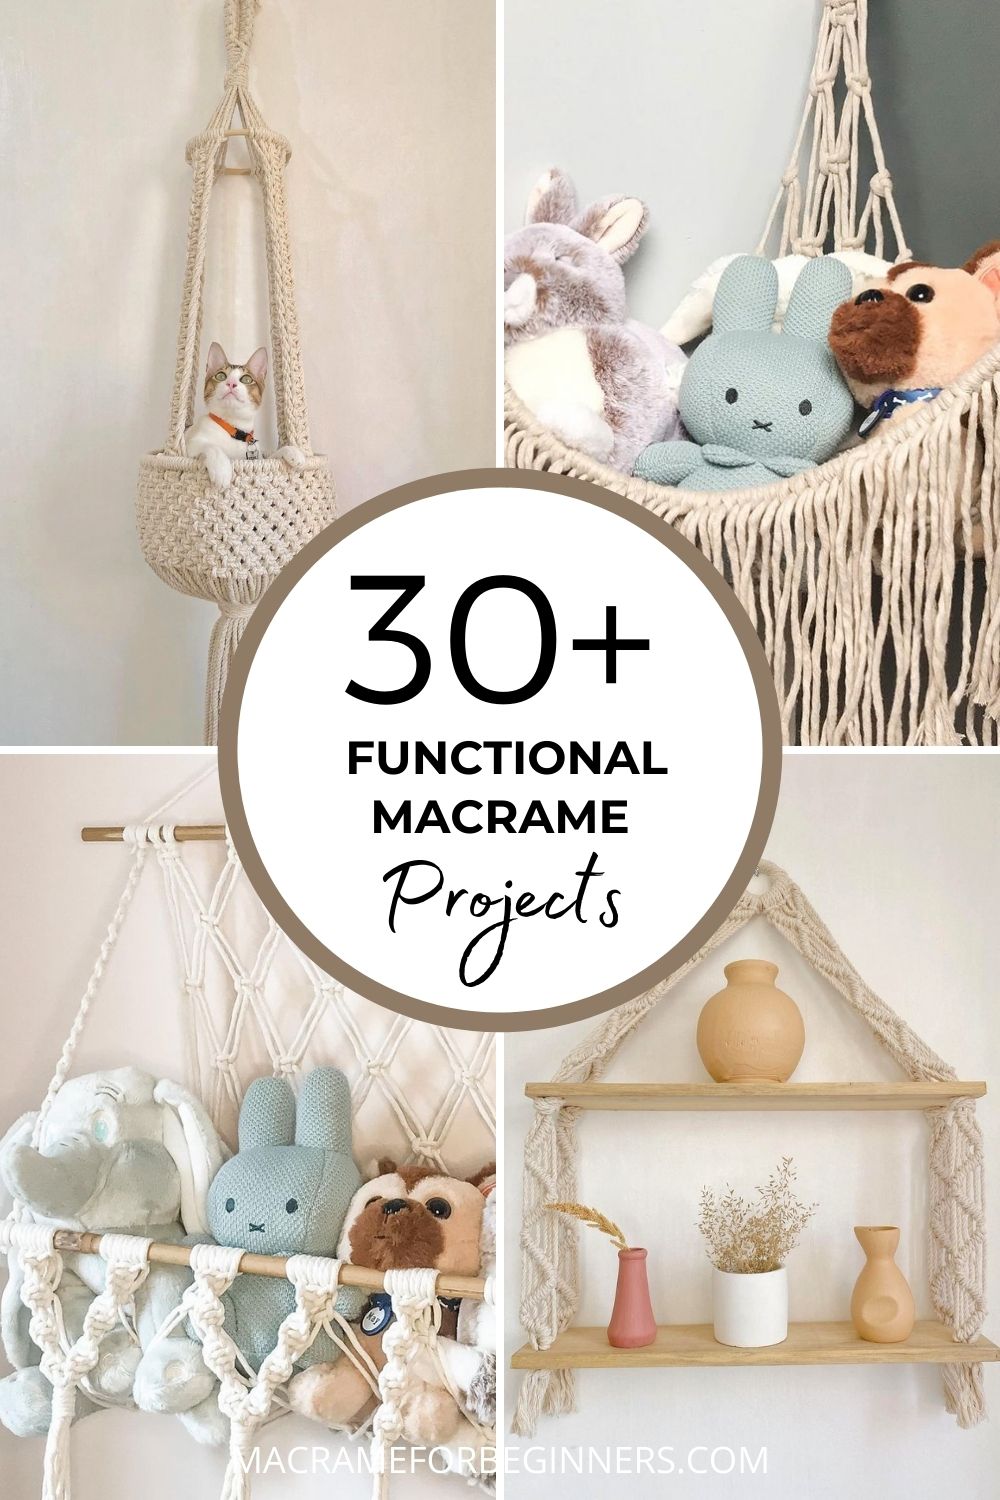 30+ Functional Macrame Projects - How to Style Your Entire Home with Macrame